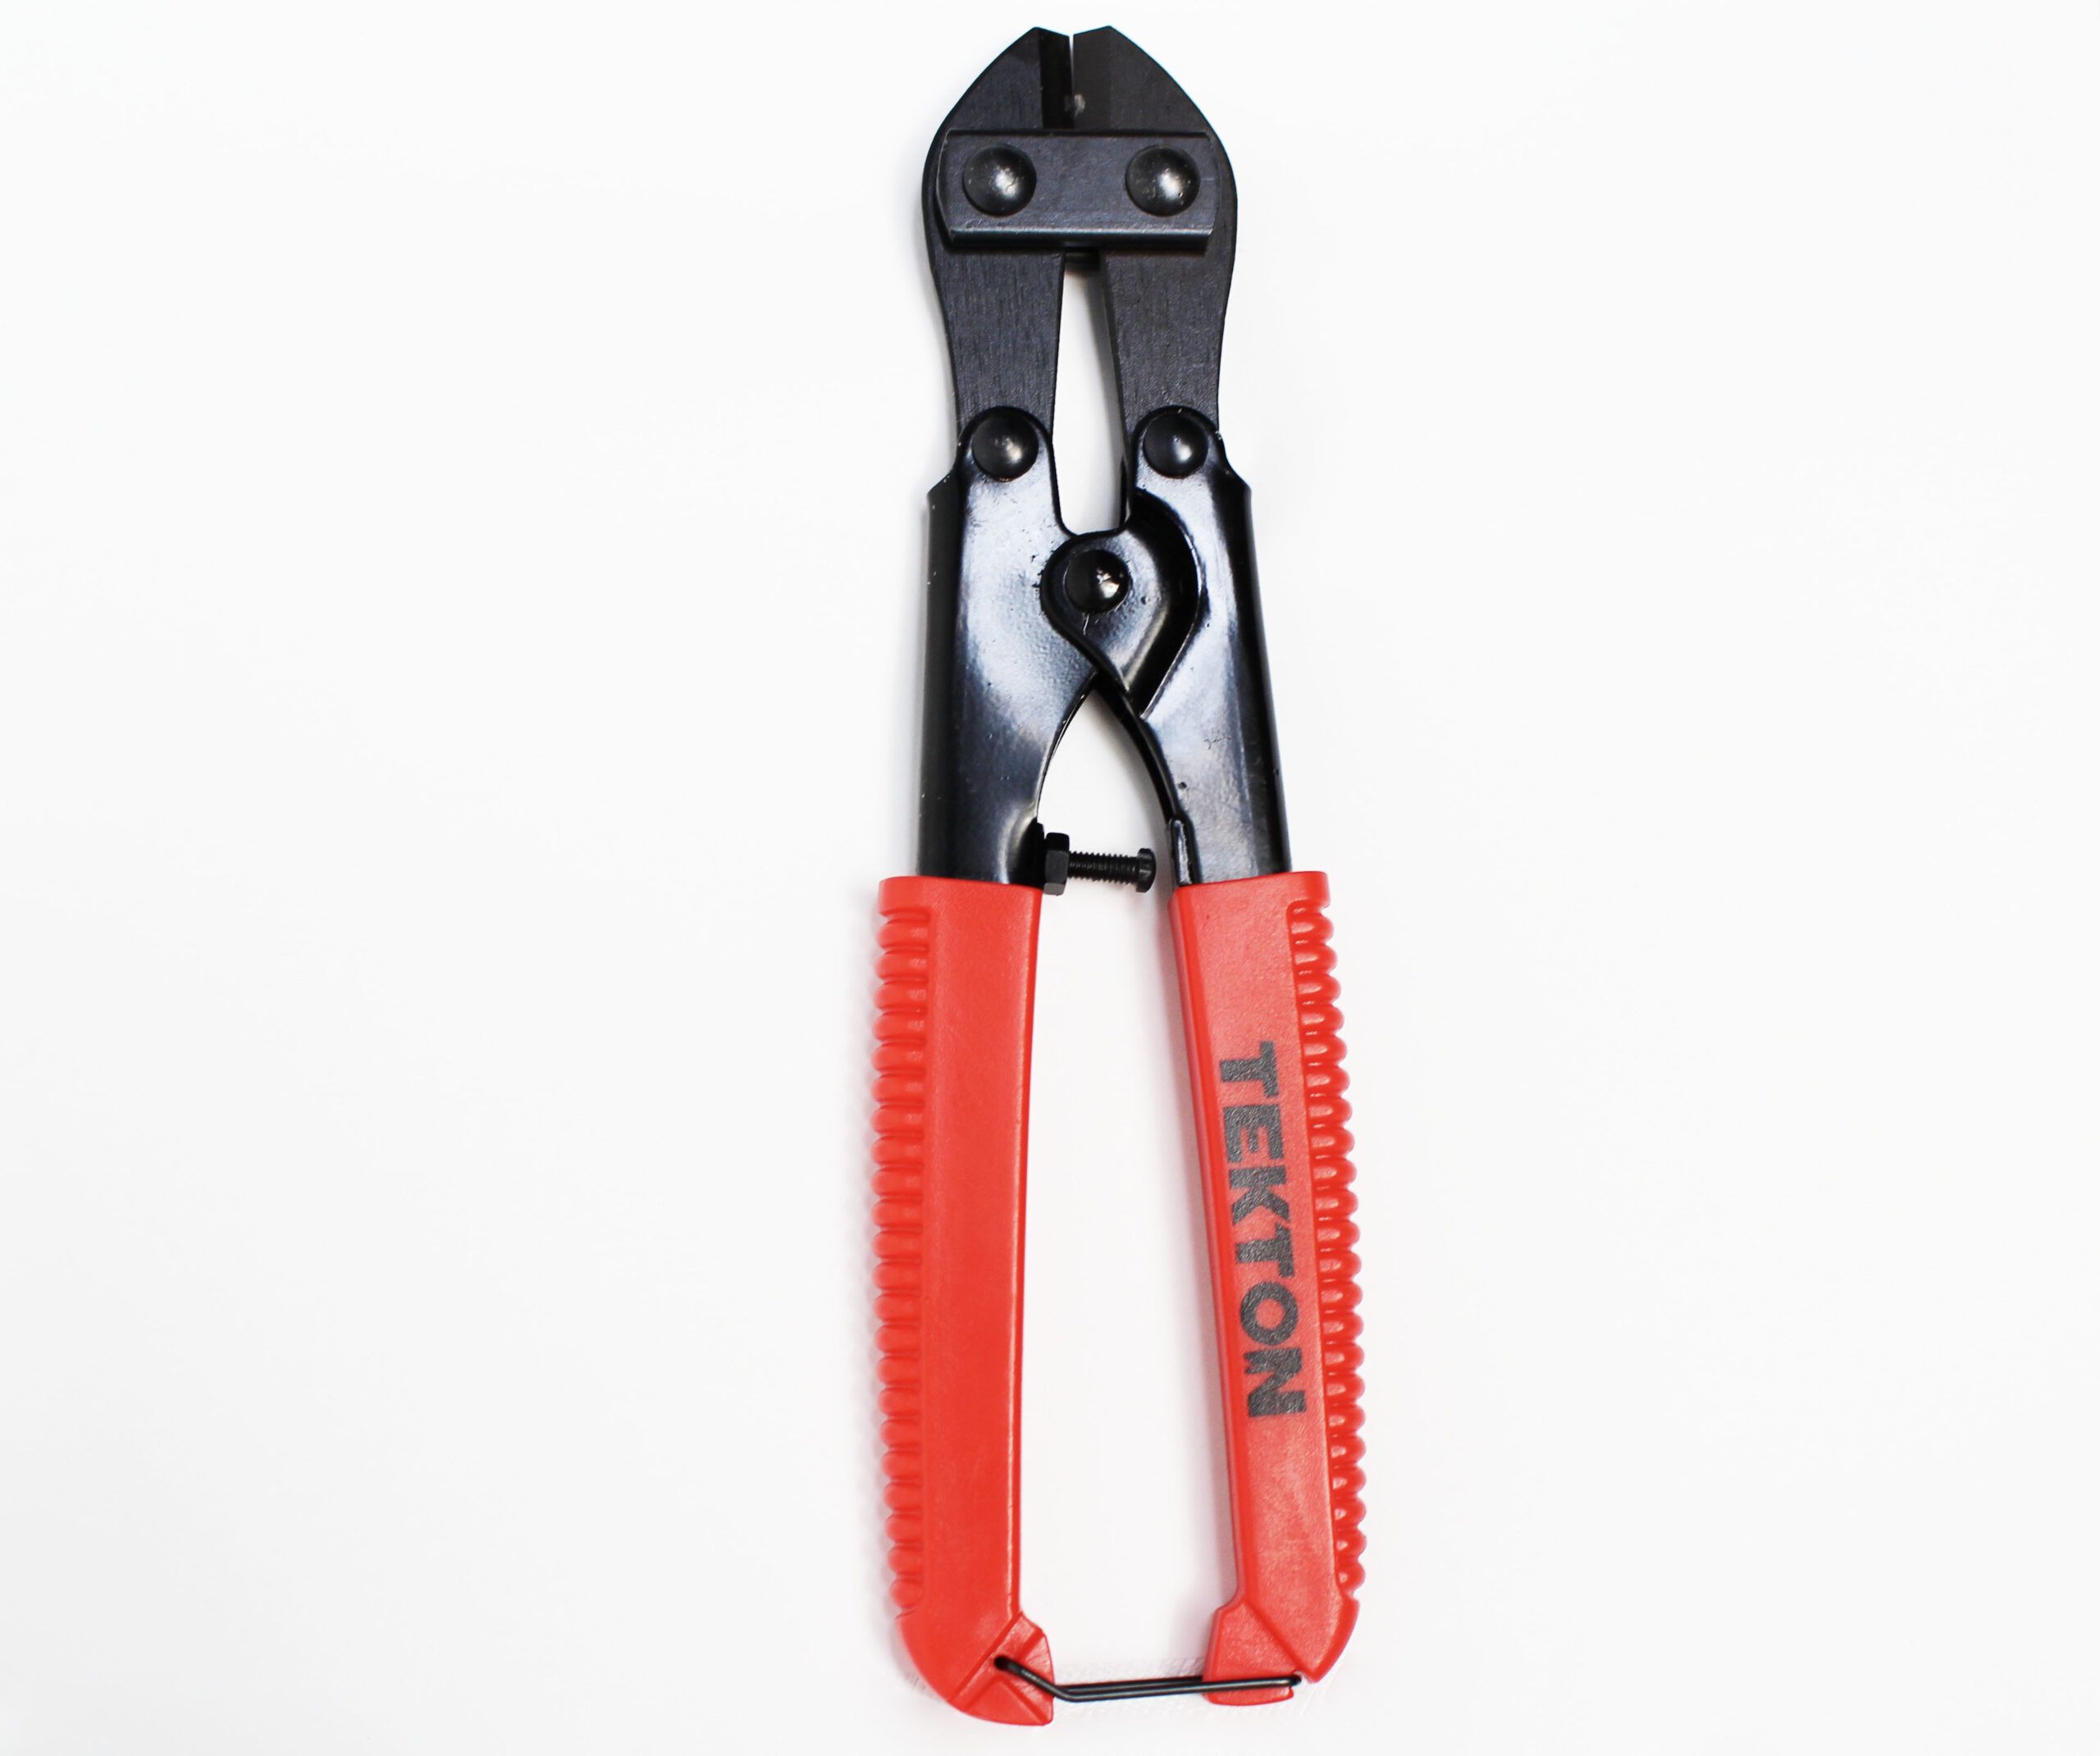 Bolt Cutter for Container Seals